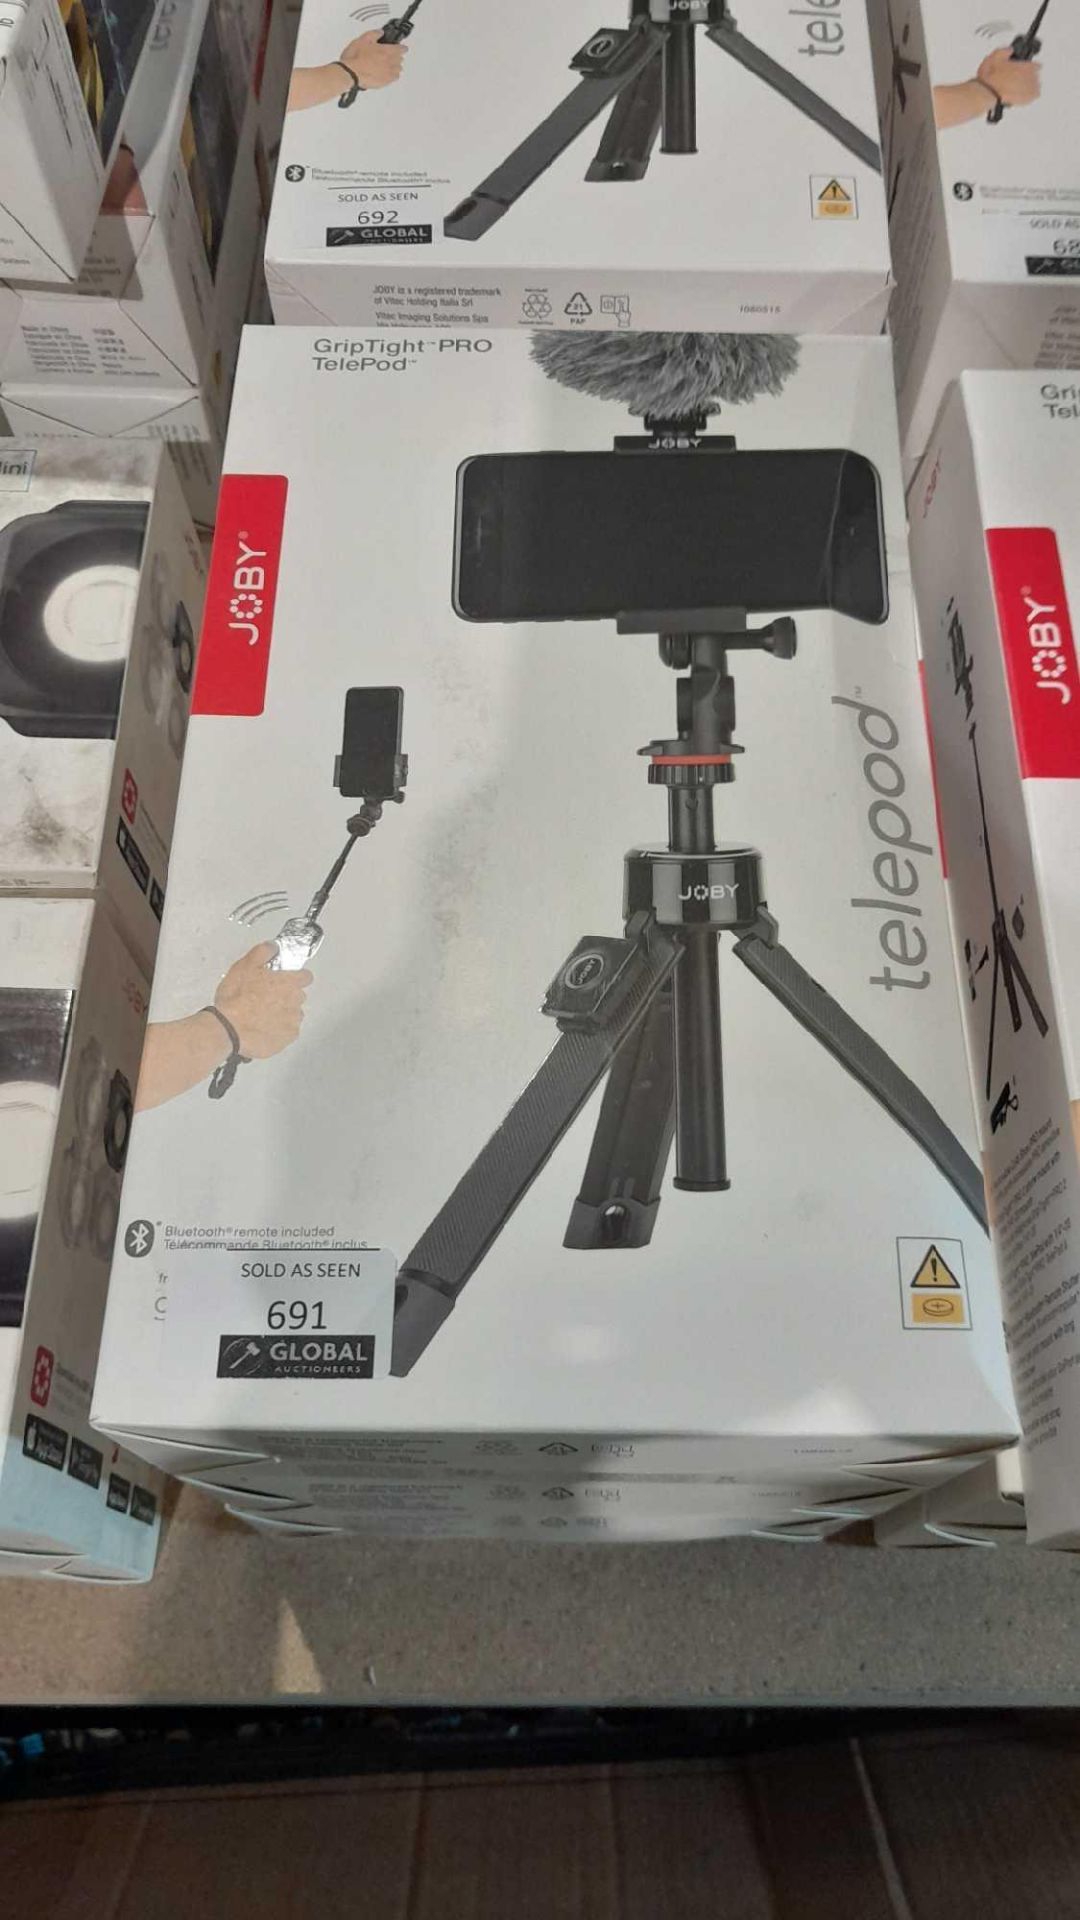 RRP £300 Lot To Contain 3 Boxed Joby Telepod Grip Tight Pro Tripod Sticks - Image 2 of 2